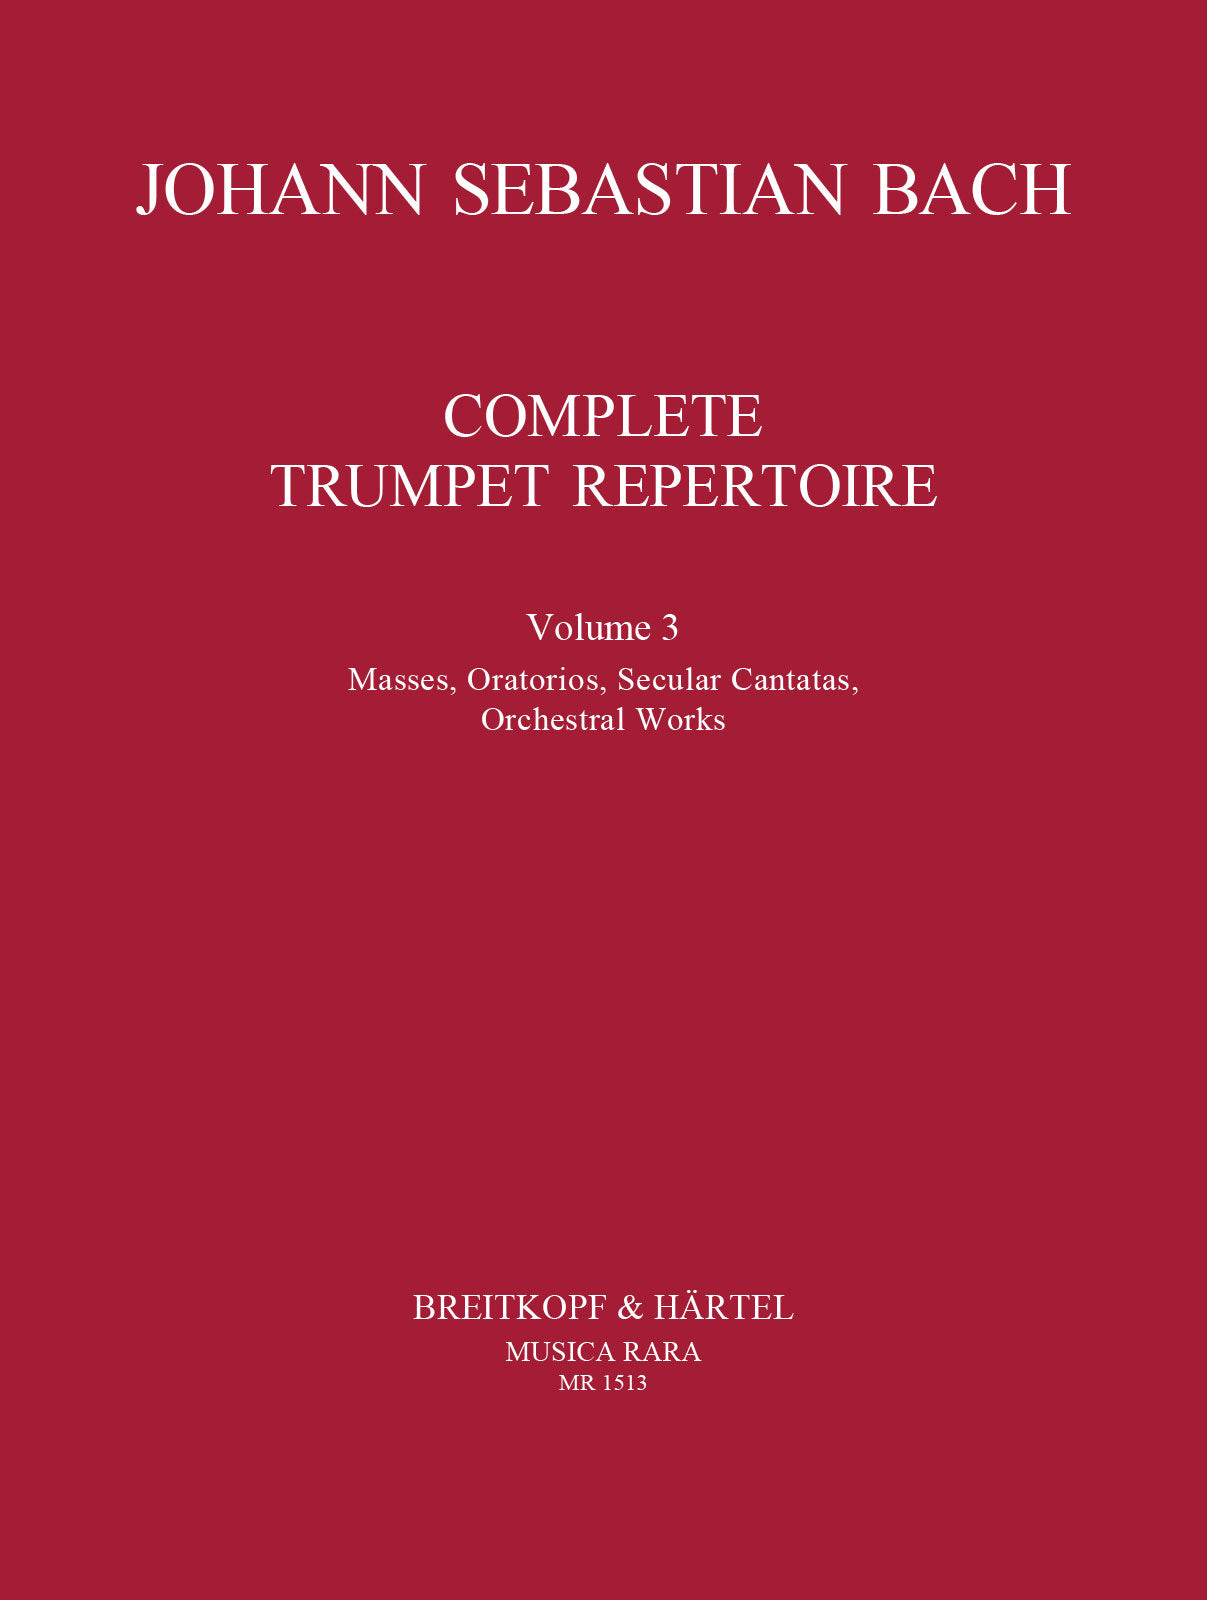 Bach: Complete Trumpet Repertoire - Volume 3 (Masses, Oratorios, Secular Cantatas, Orchestral Works)